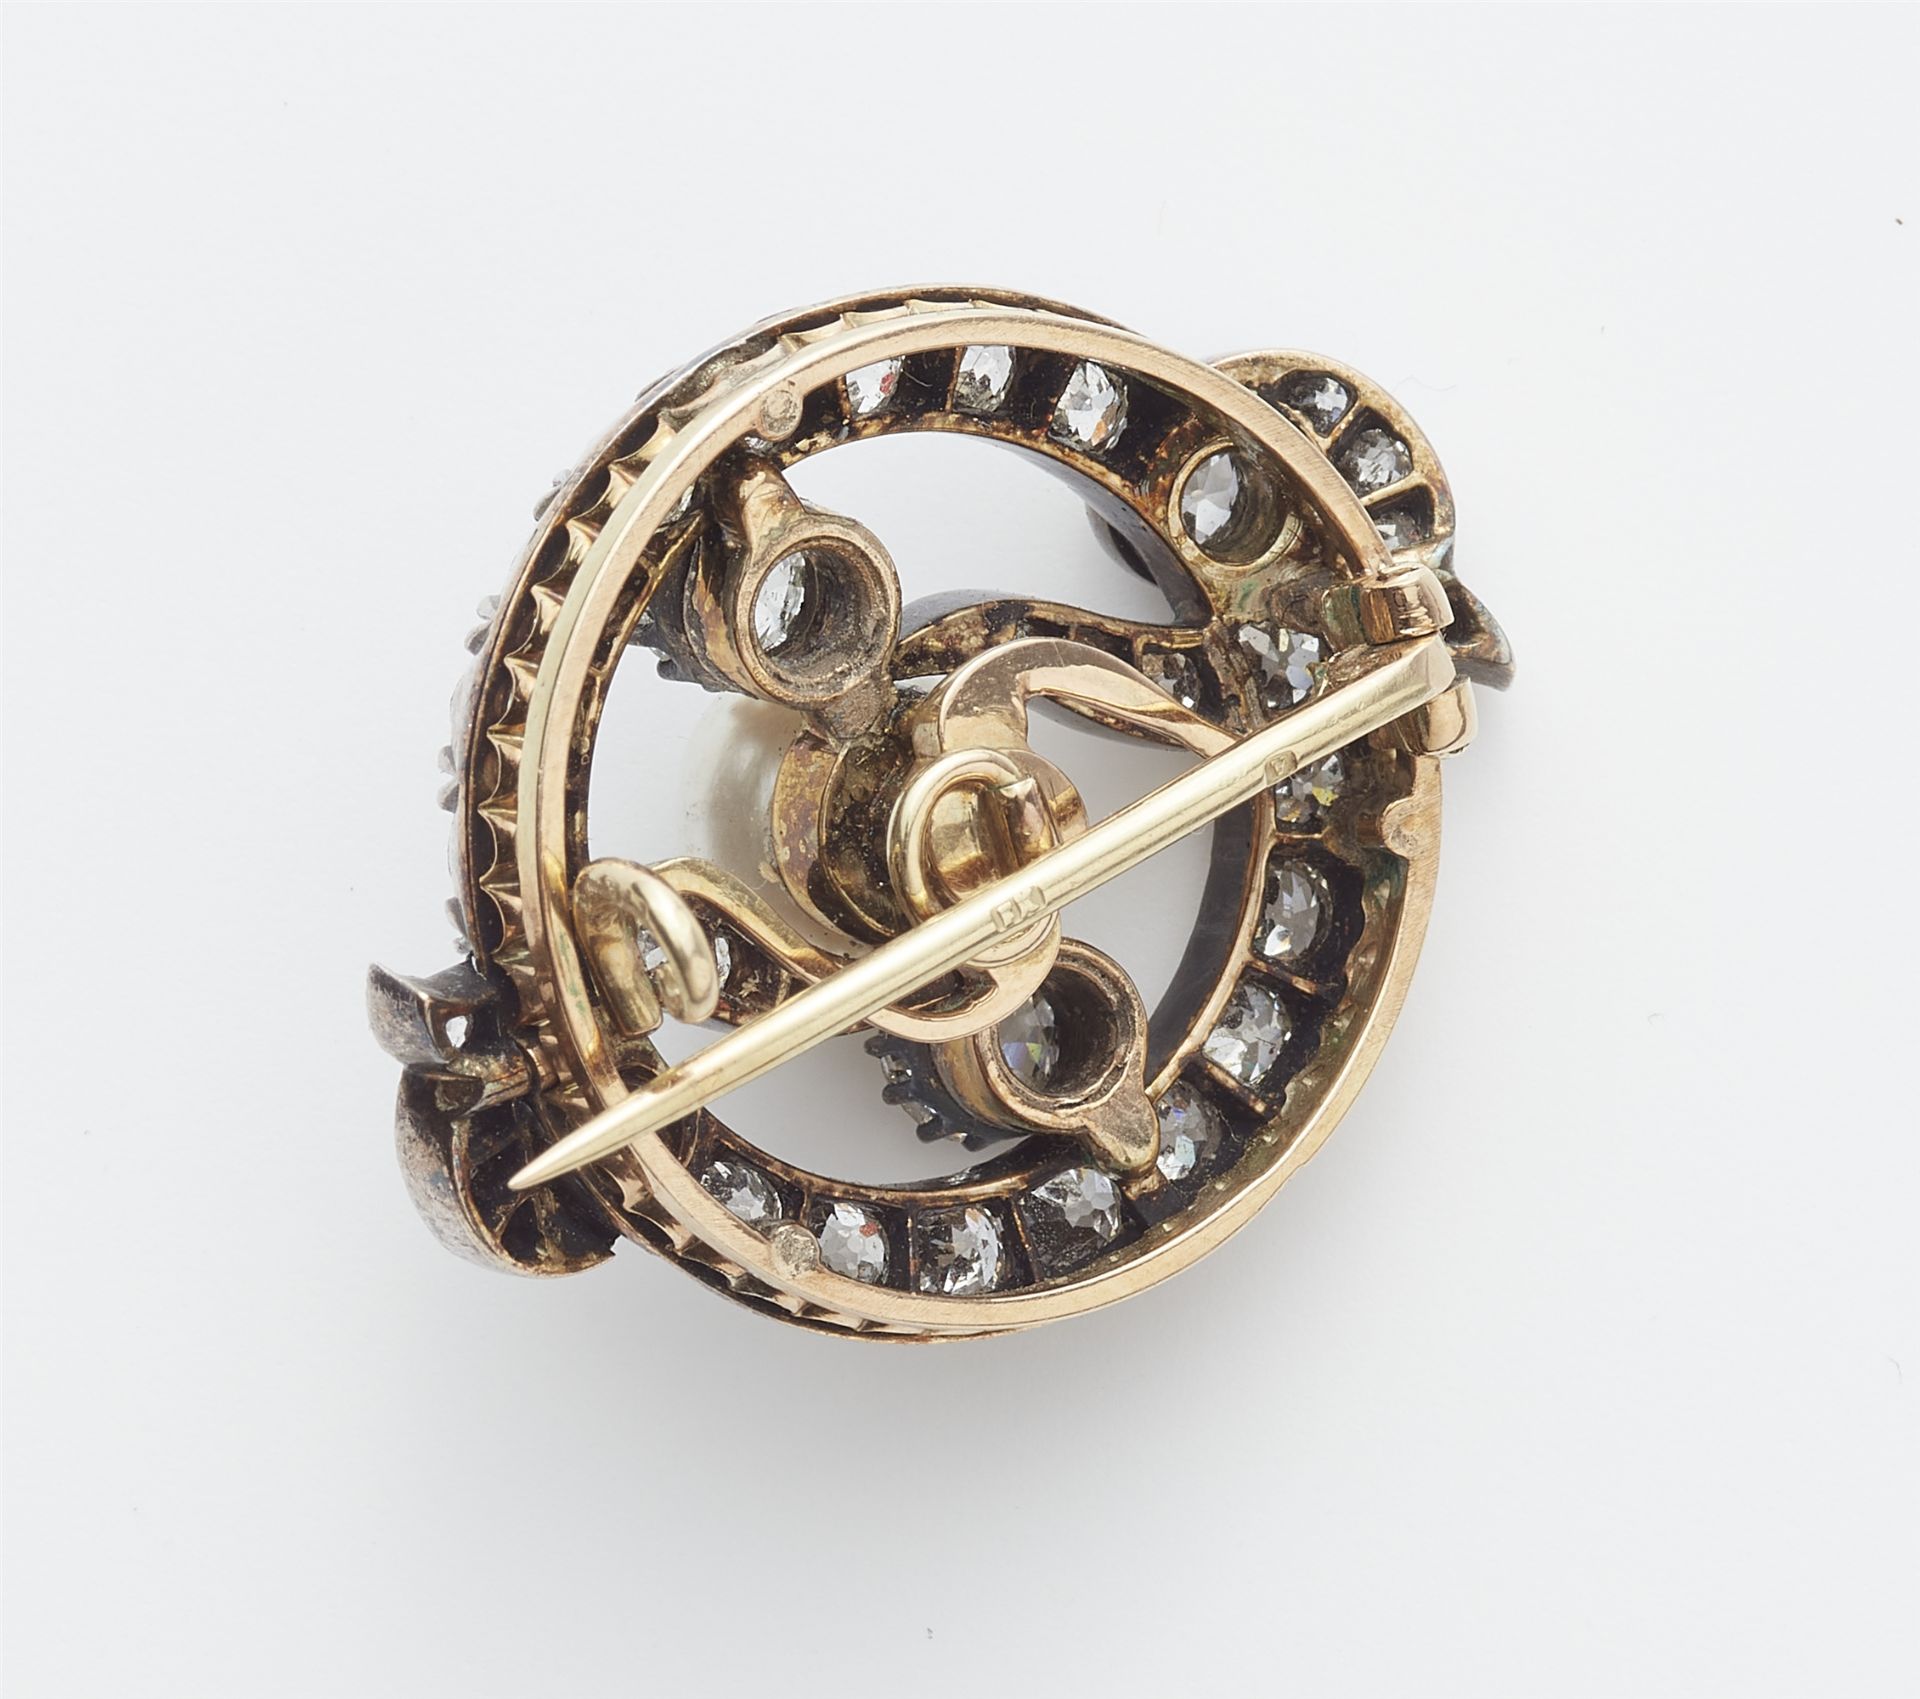 An Austrian 14k gold and European old-cut diamond brooch with a bouton pearl. - Image 2 of 2